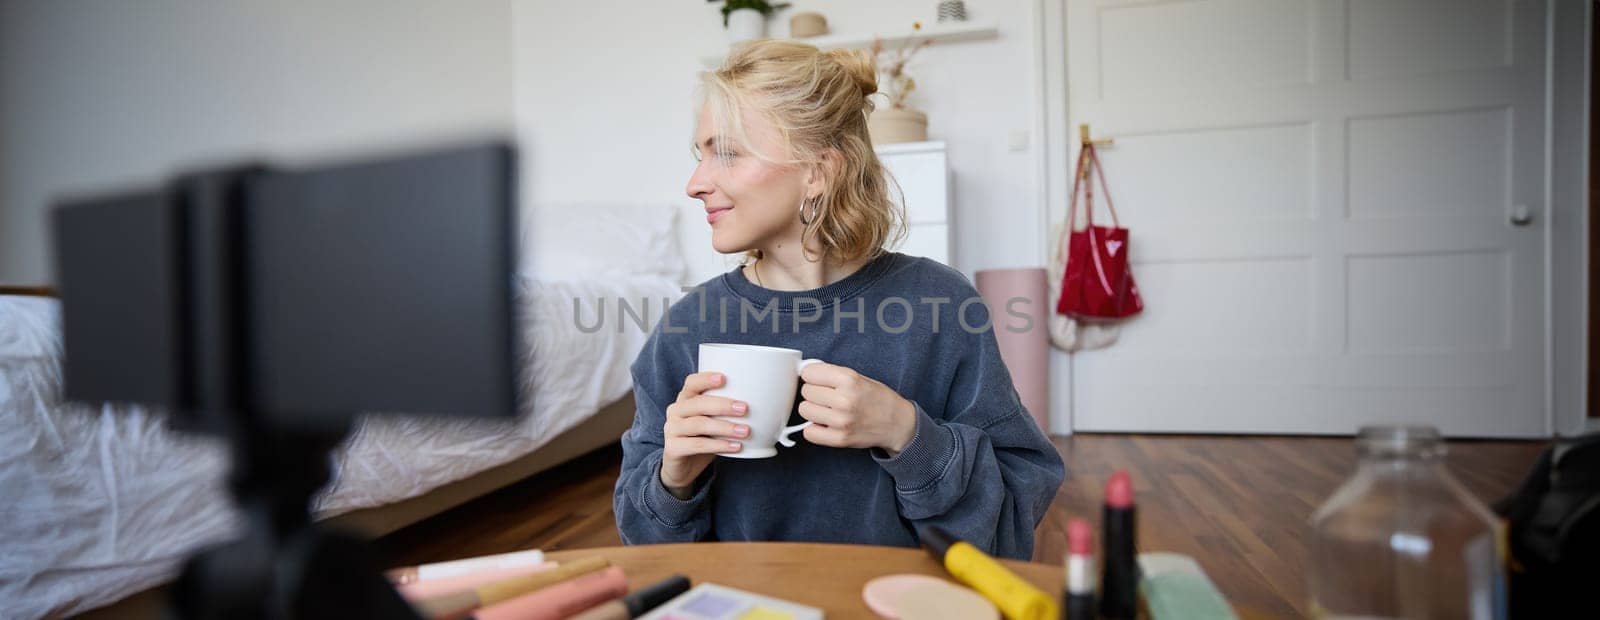 Image of young woman, makeup vlogger, sitting in bedroom with digital camera, drinking tea and talking, creating lifestyle video, social media content.